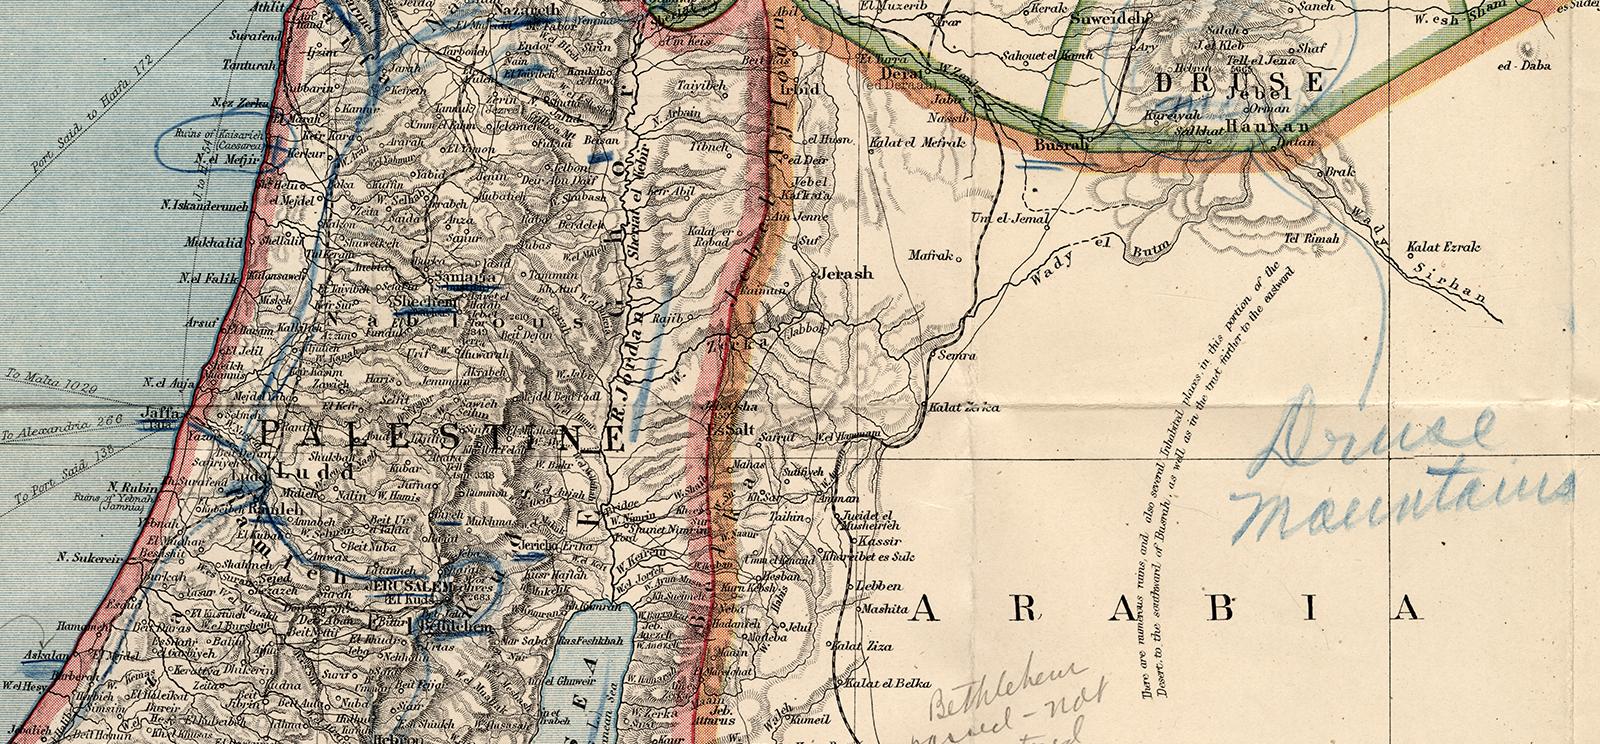 Crop of a map showing part of Palestine, Arabia and the Mediterranean Sea